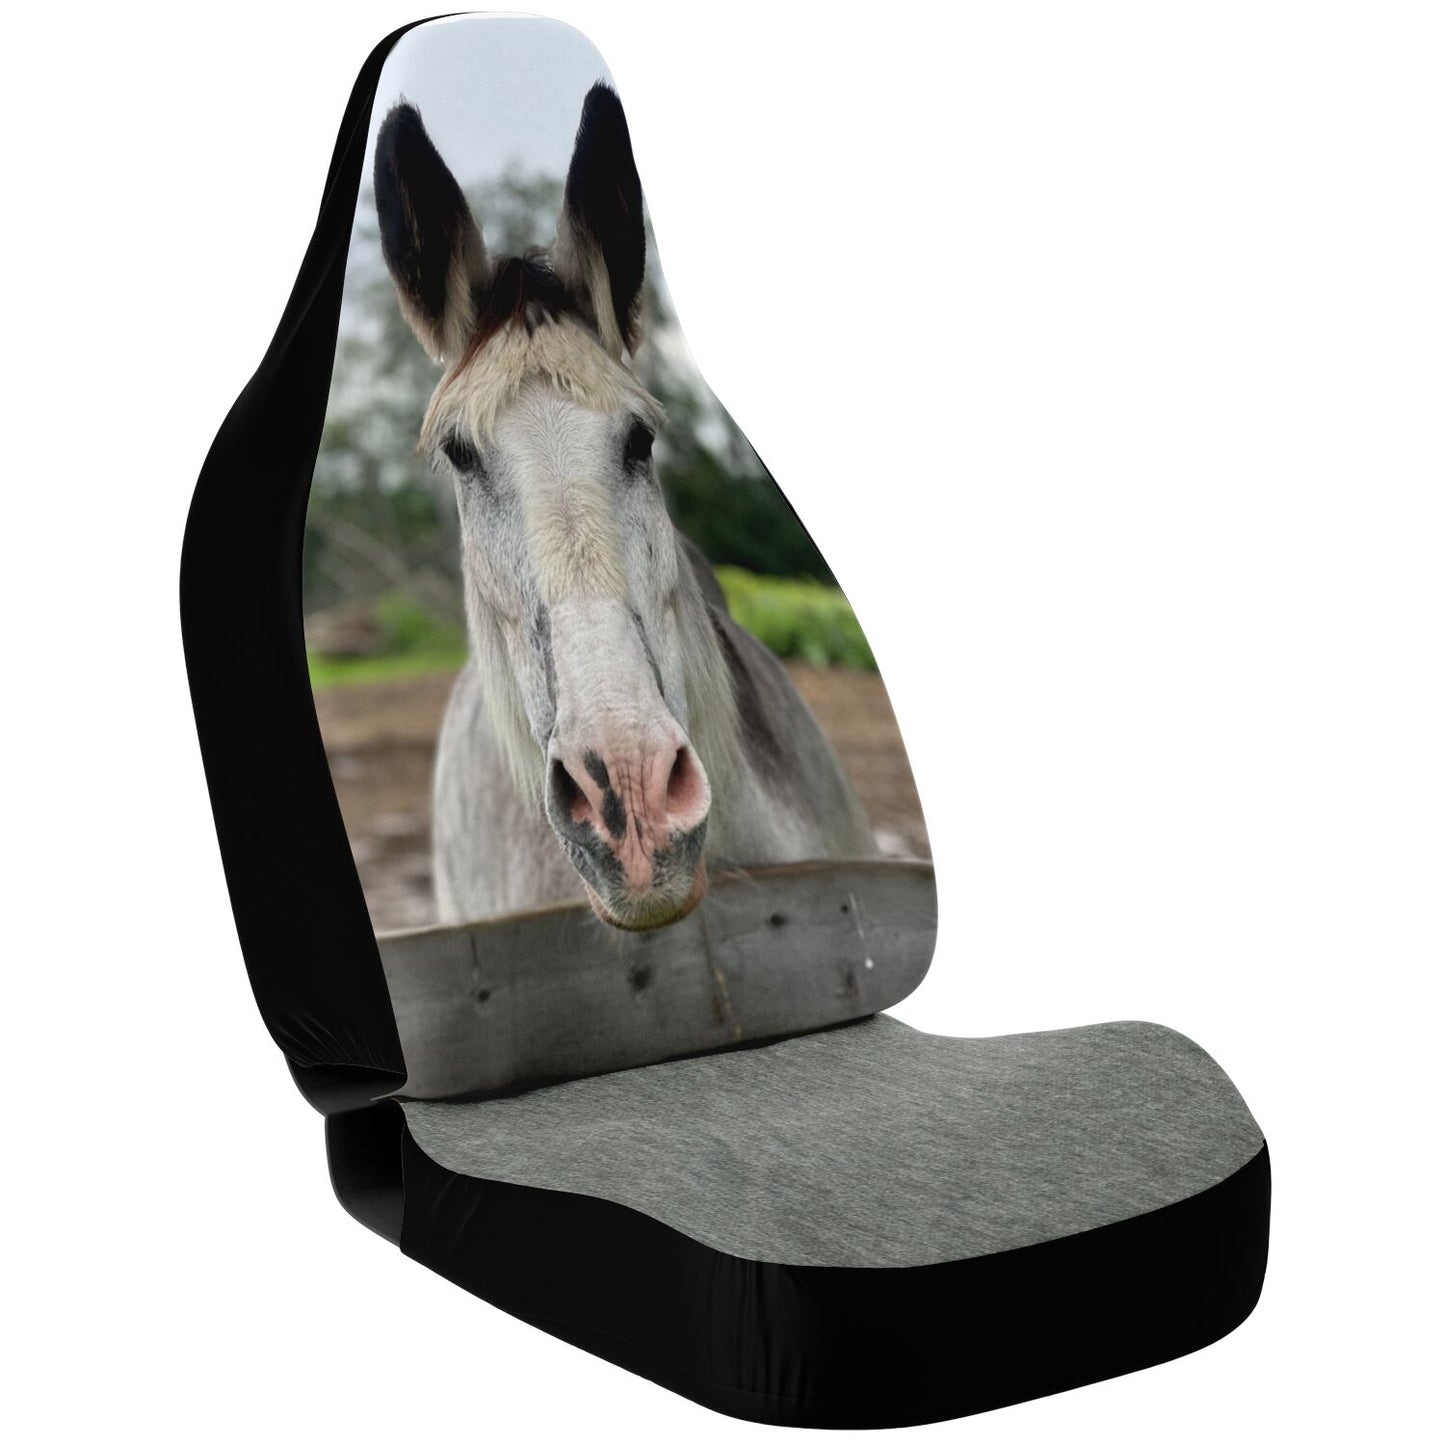 Car Seat Cover Driving your A$$ around. - AOP